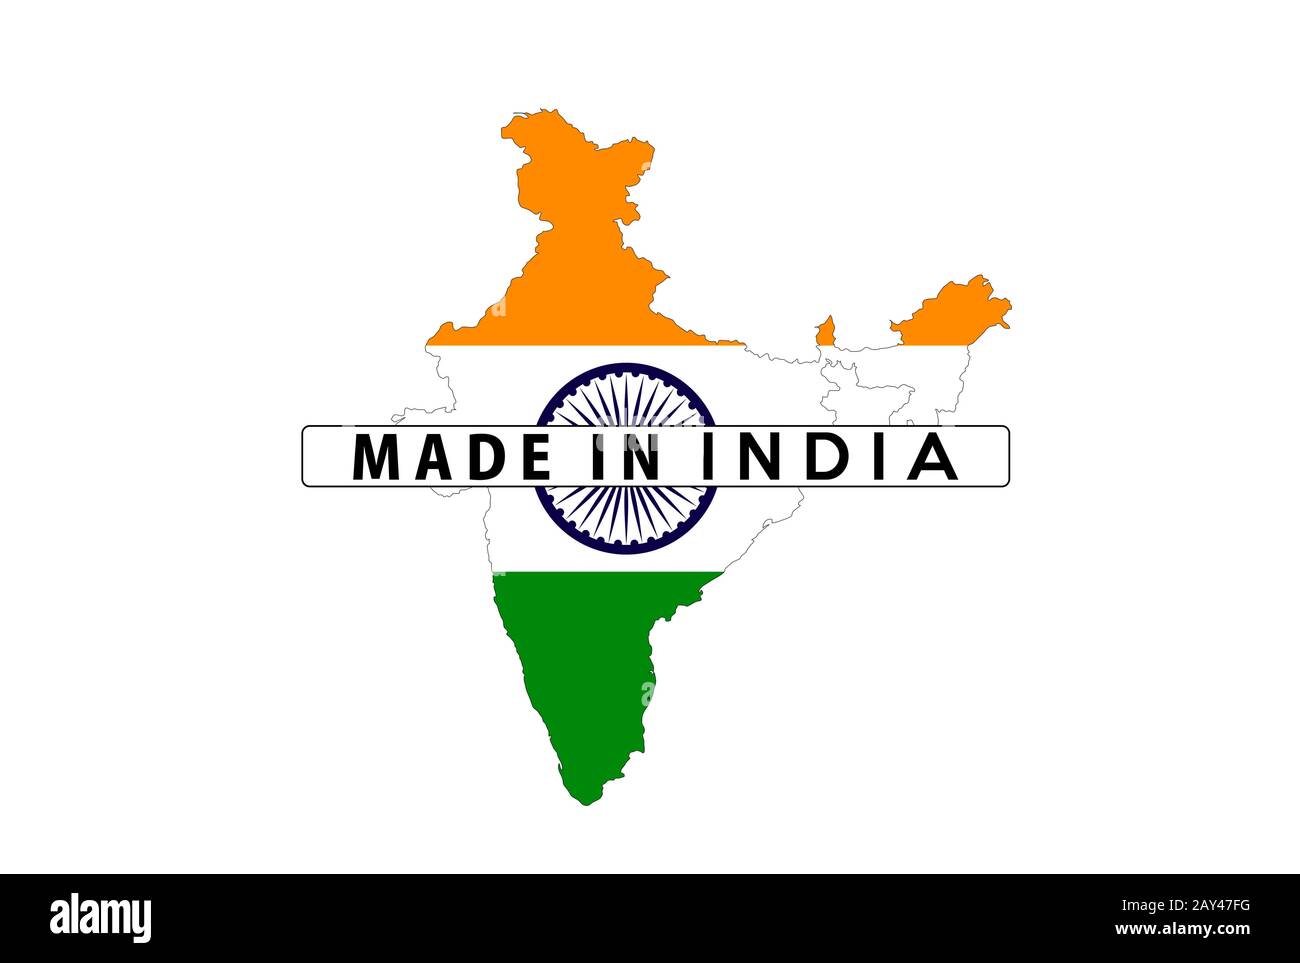 made in india Stock Photo